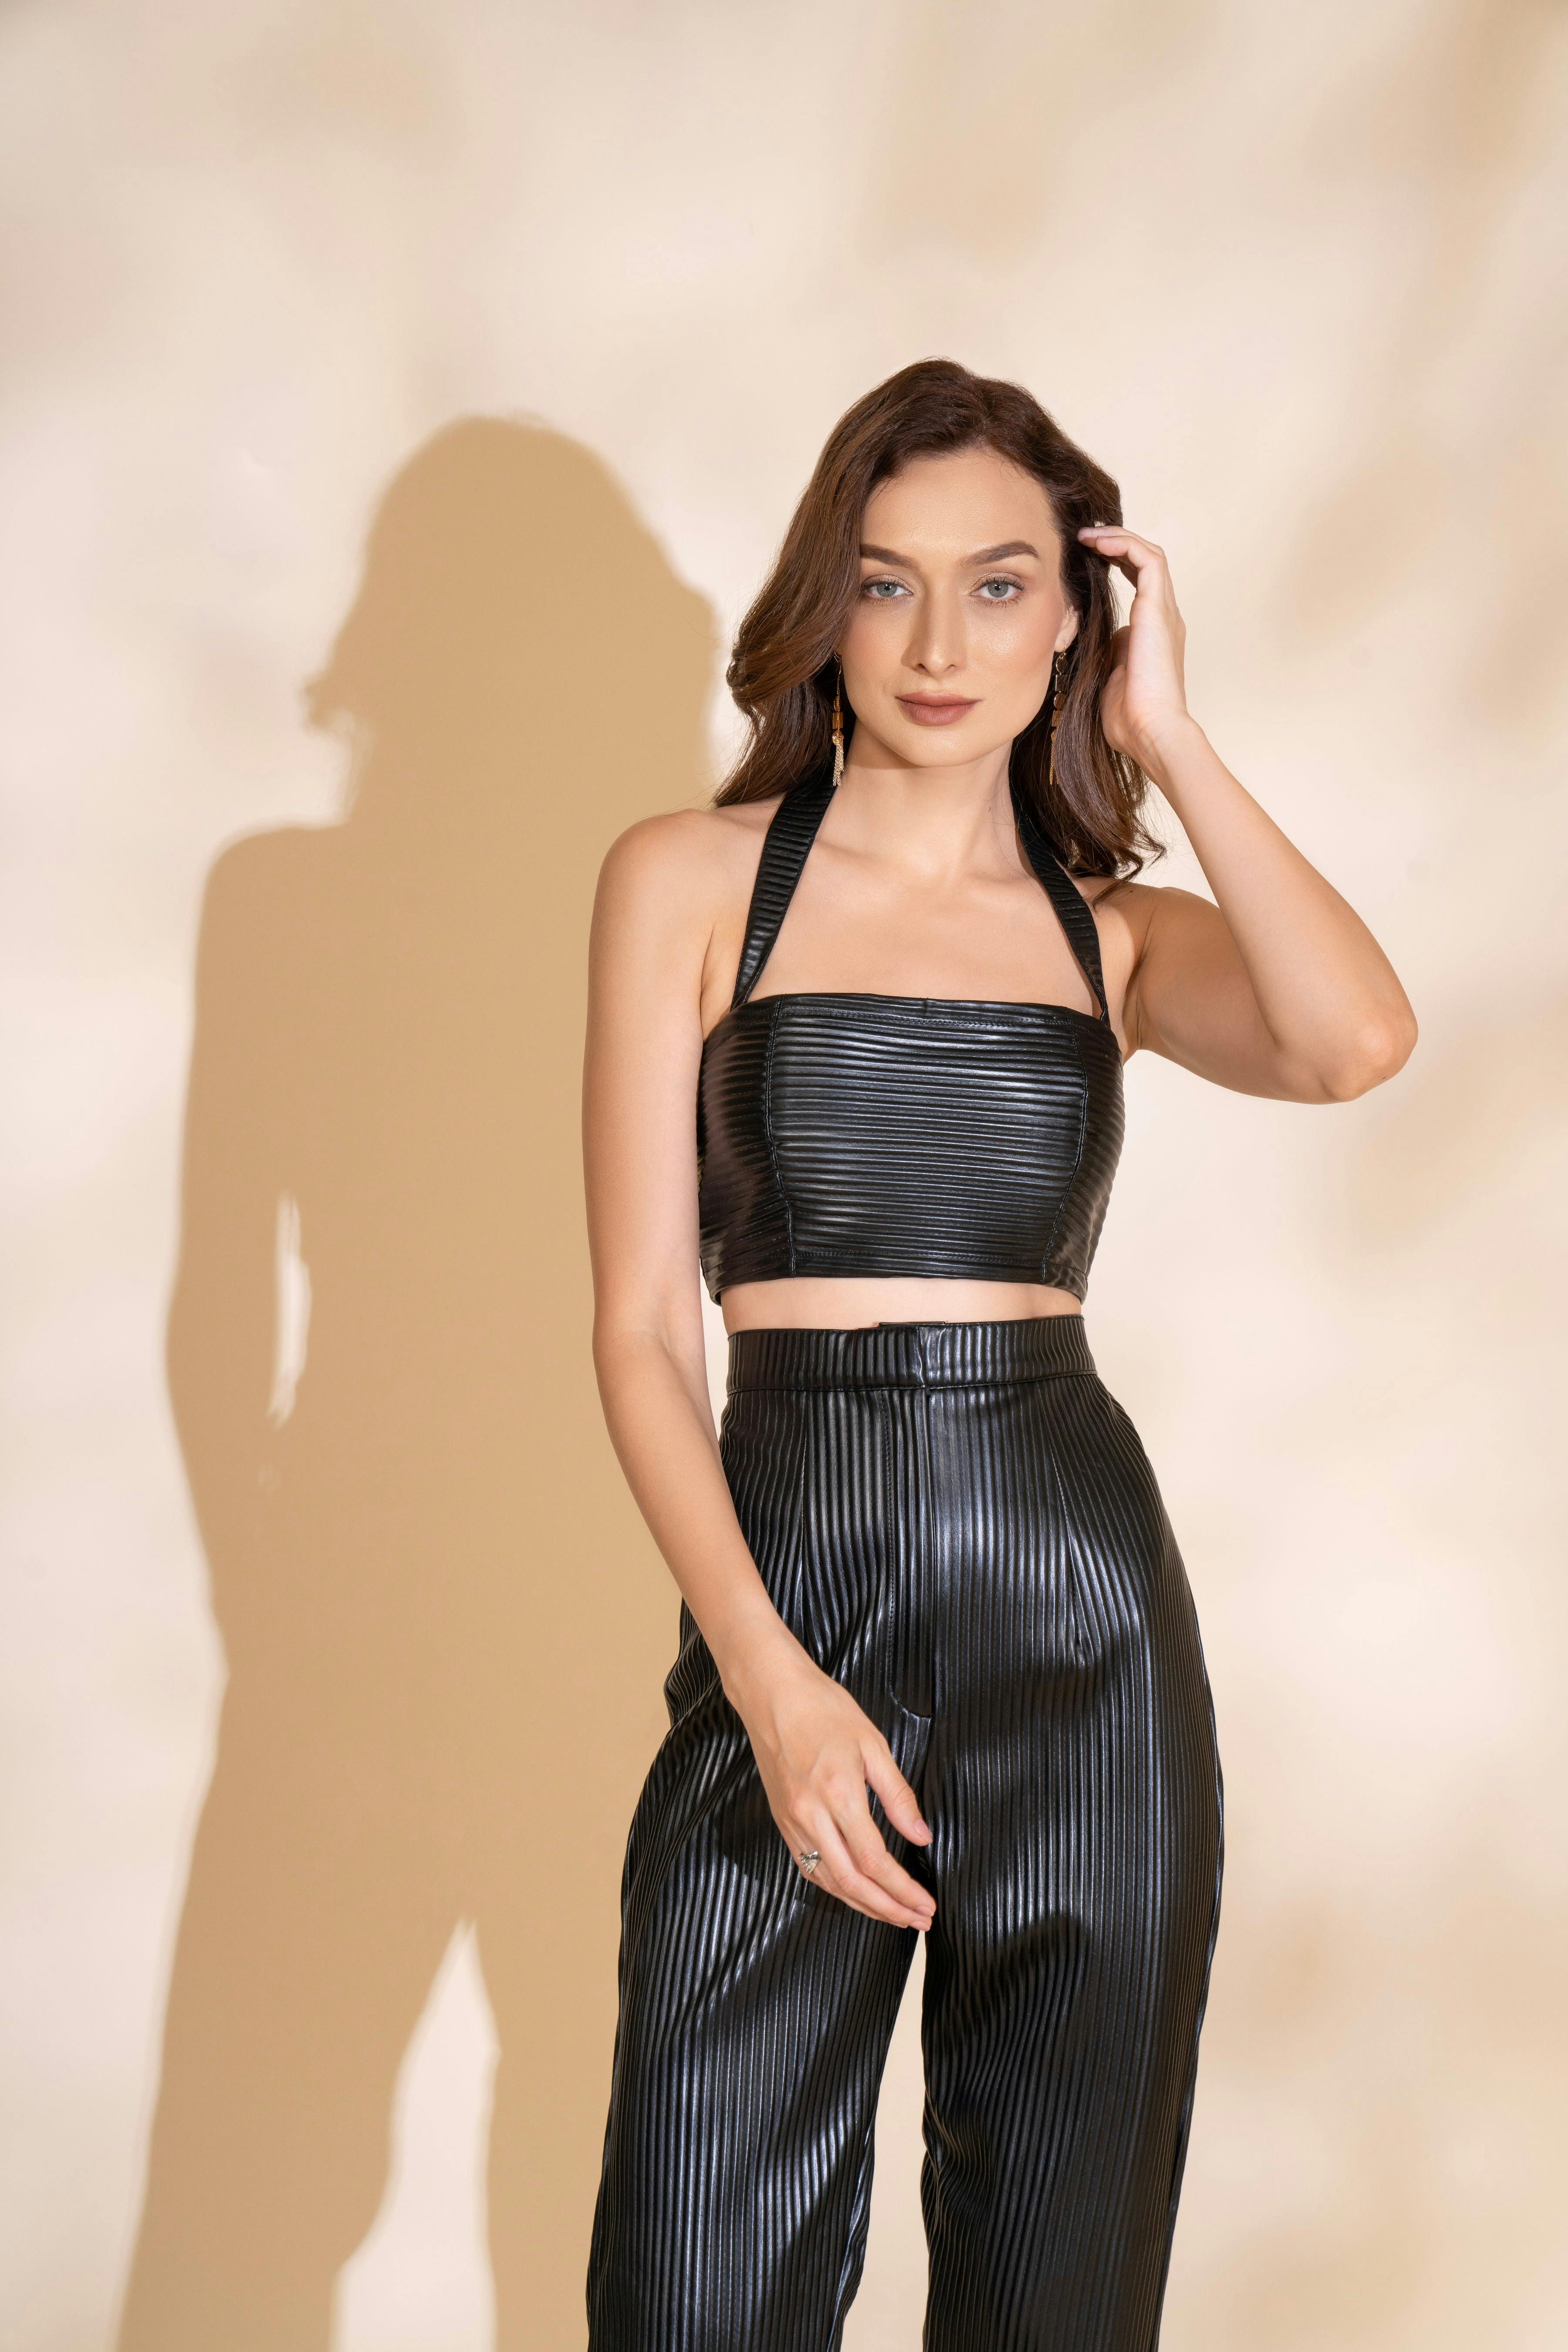 Black Pleated Leather Crop Top, a product by Torqadorn